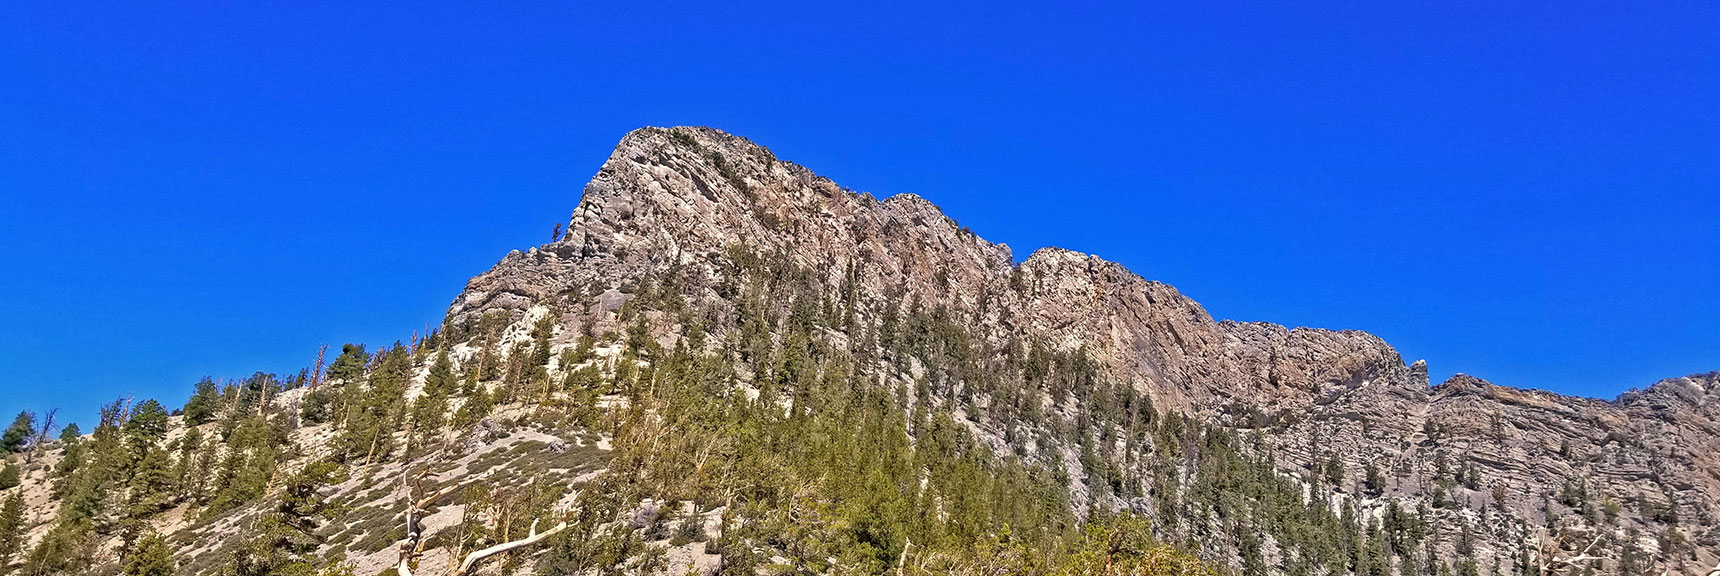 On Return Trip Took Ridge Branching Off to Right from Approach Ridge High Point Just Ahead | Macks Peak | Mt Charleston Wilderness | Spring Mountains, Nevada